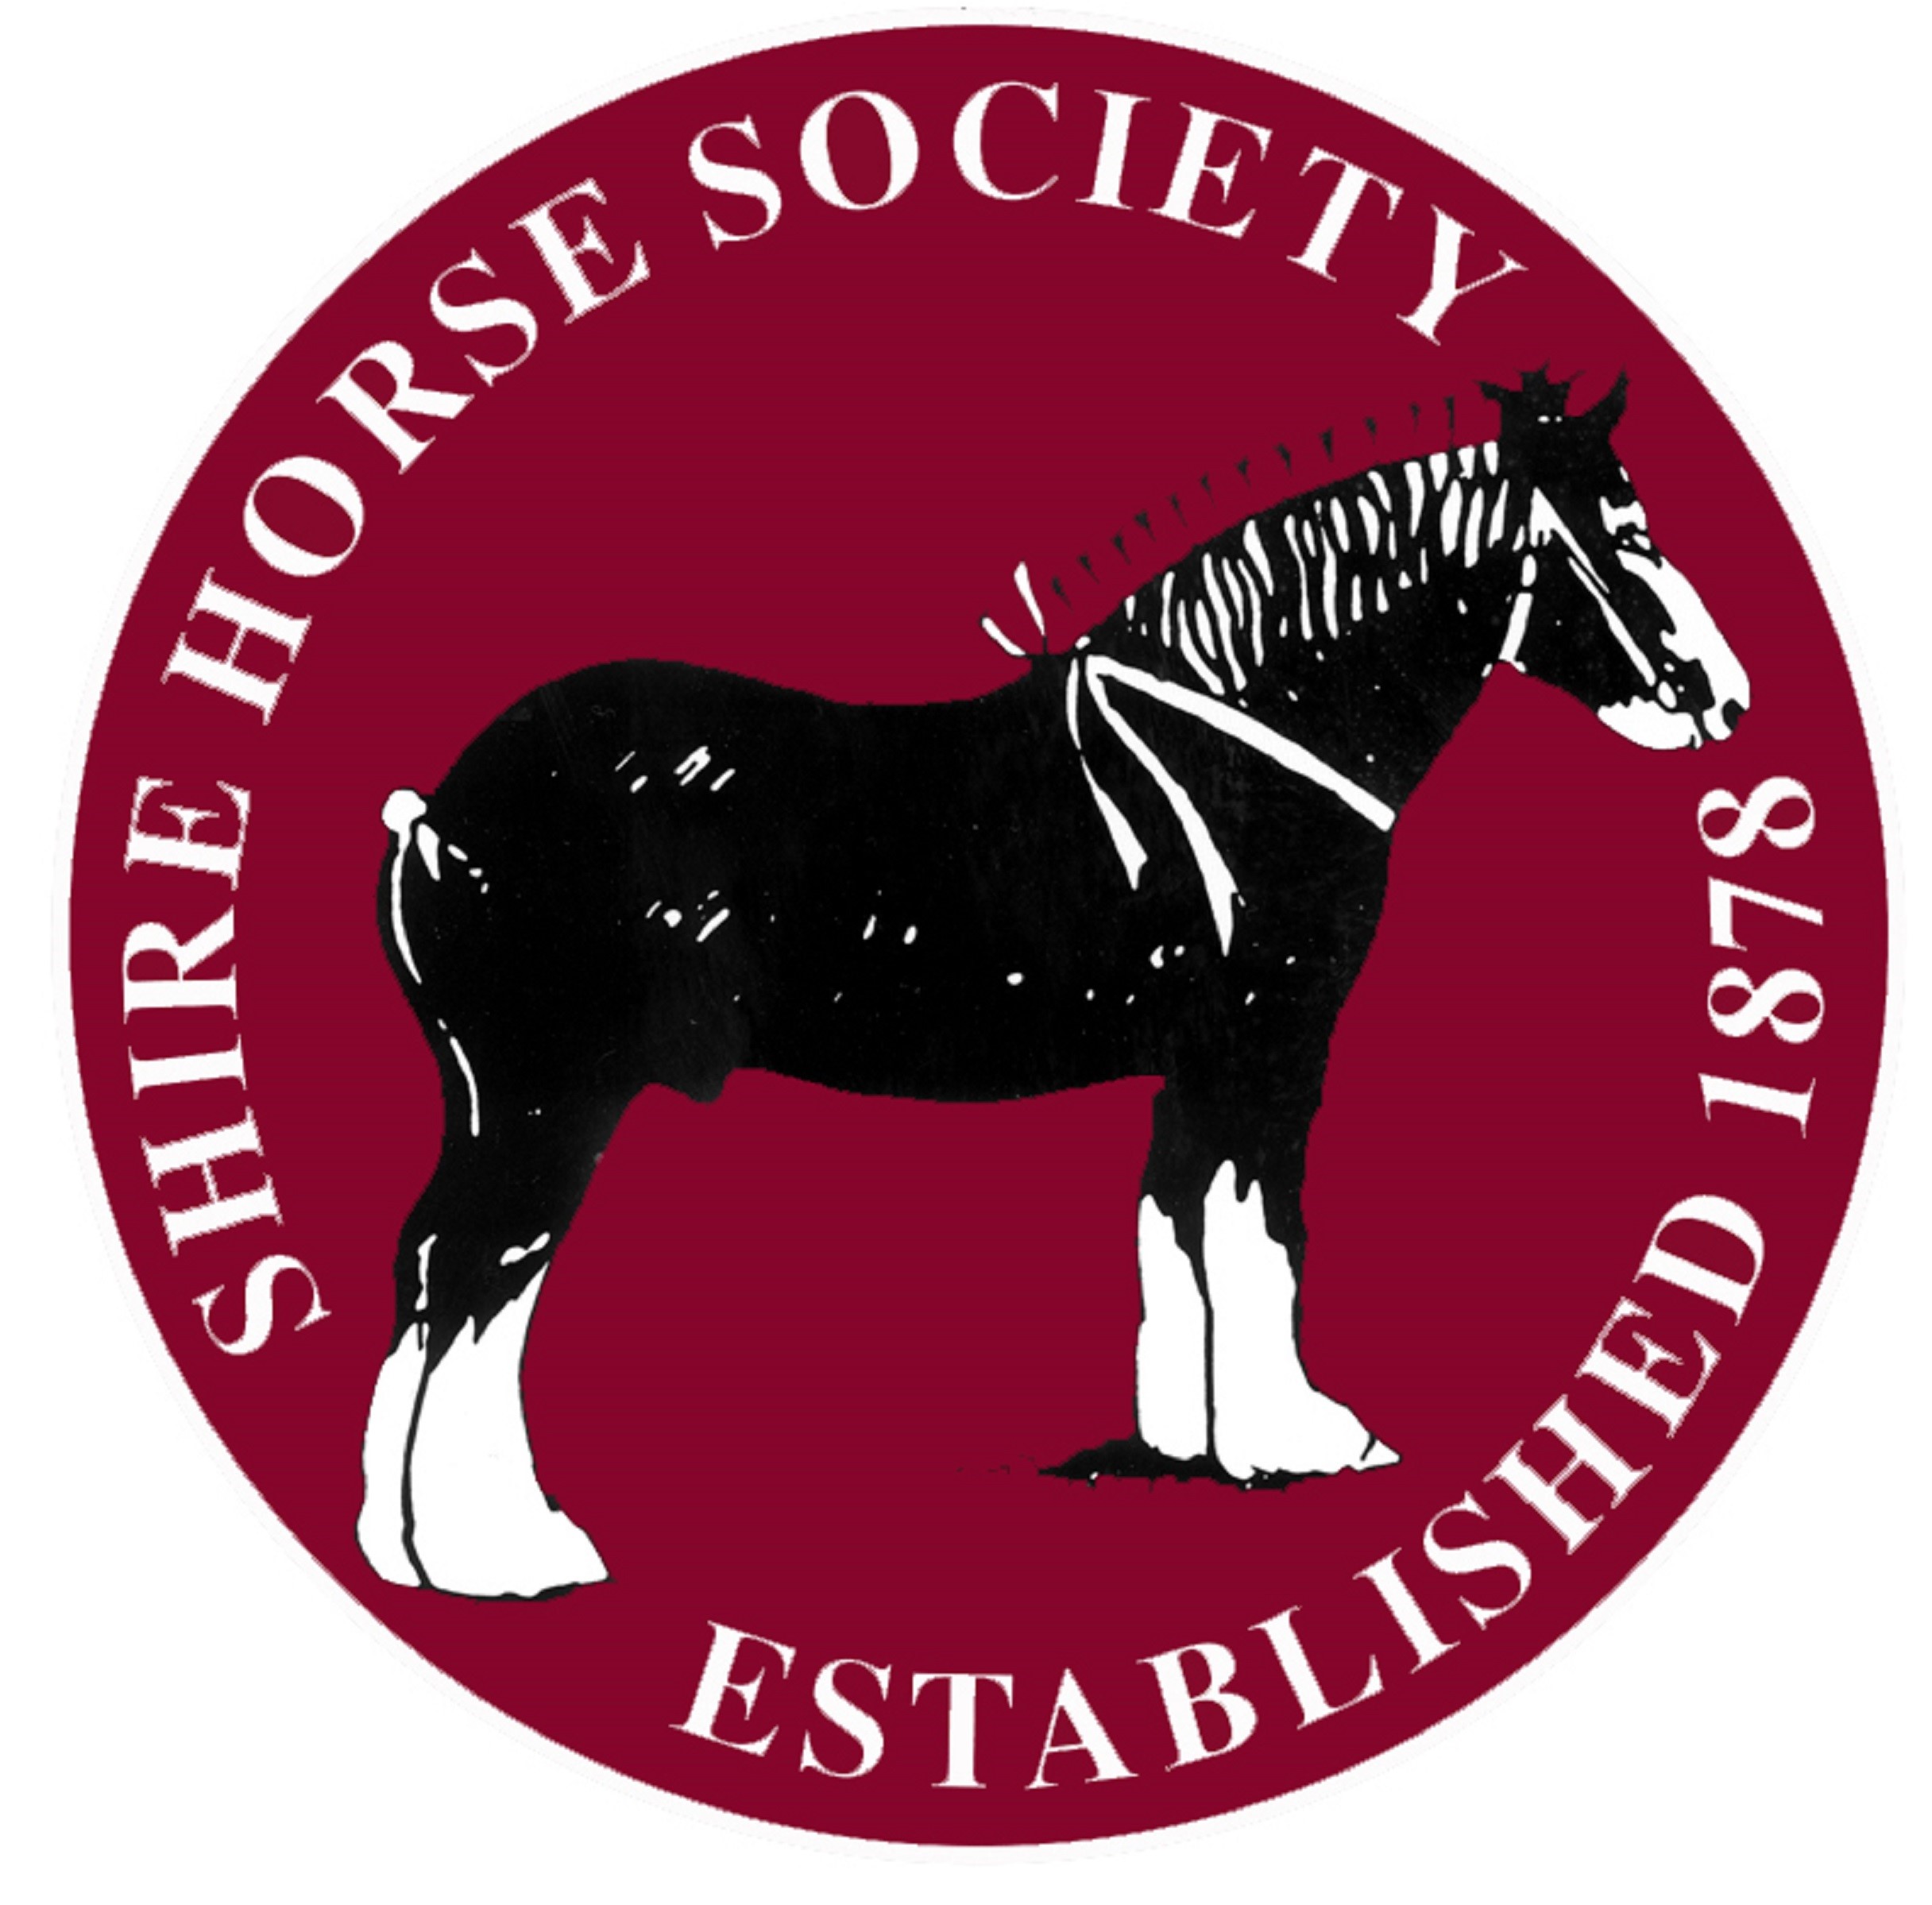 Shire Horse Society's Annual Prize Draw. Prizes:  1st £250,  2nd £100,  3rd, 4th and 5th £50 each. Draw to take place at the National Shire Horse Show at 4pm on 13th March 2022